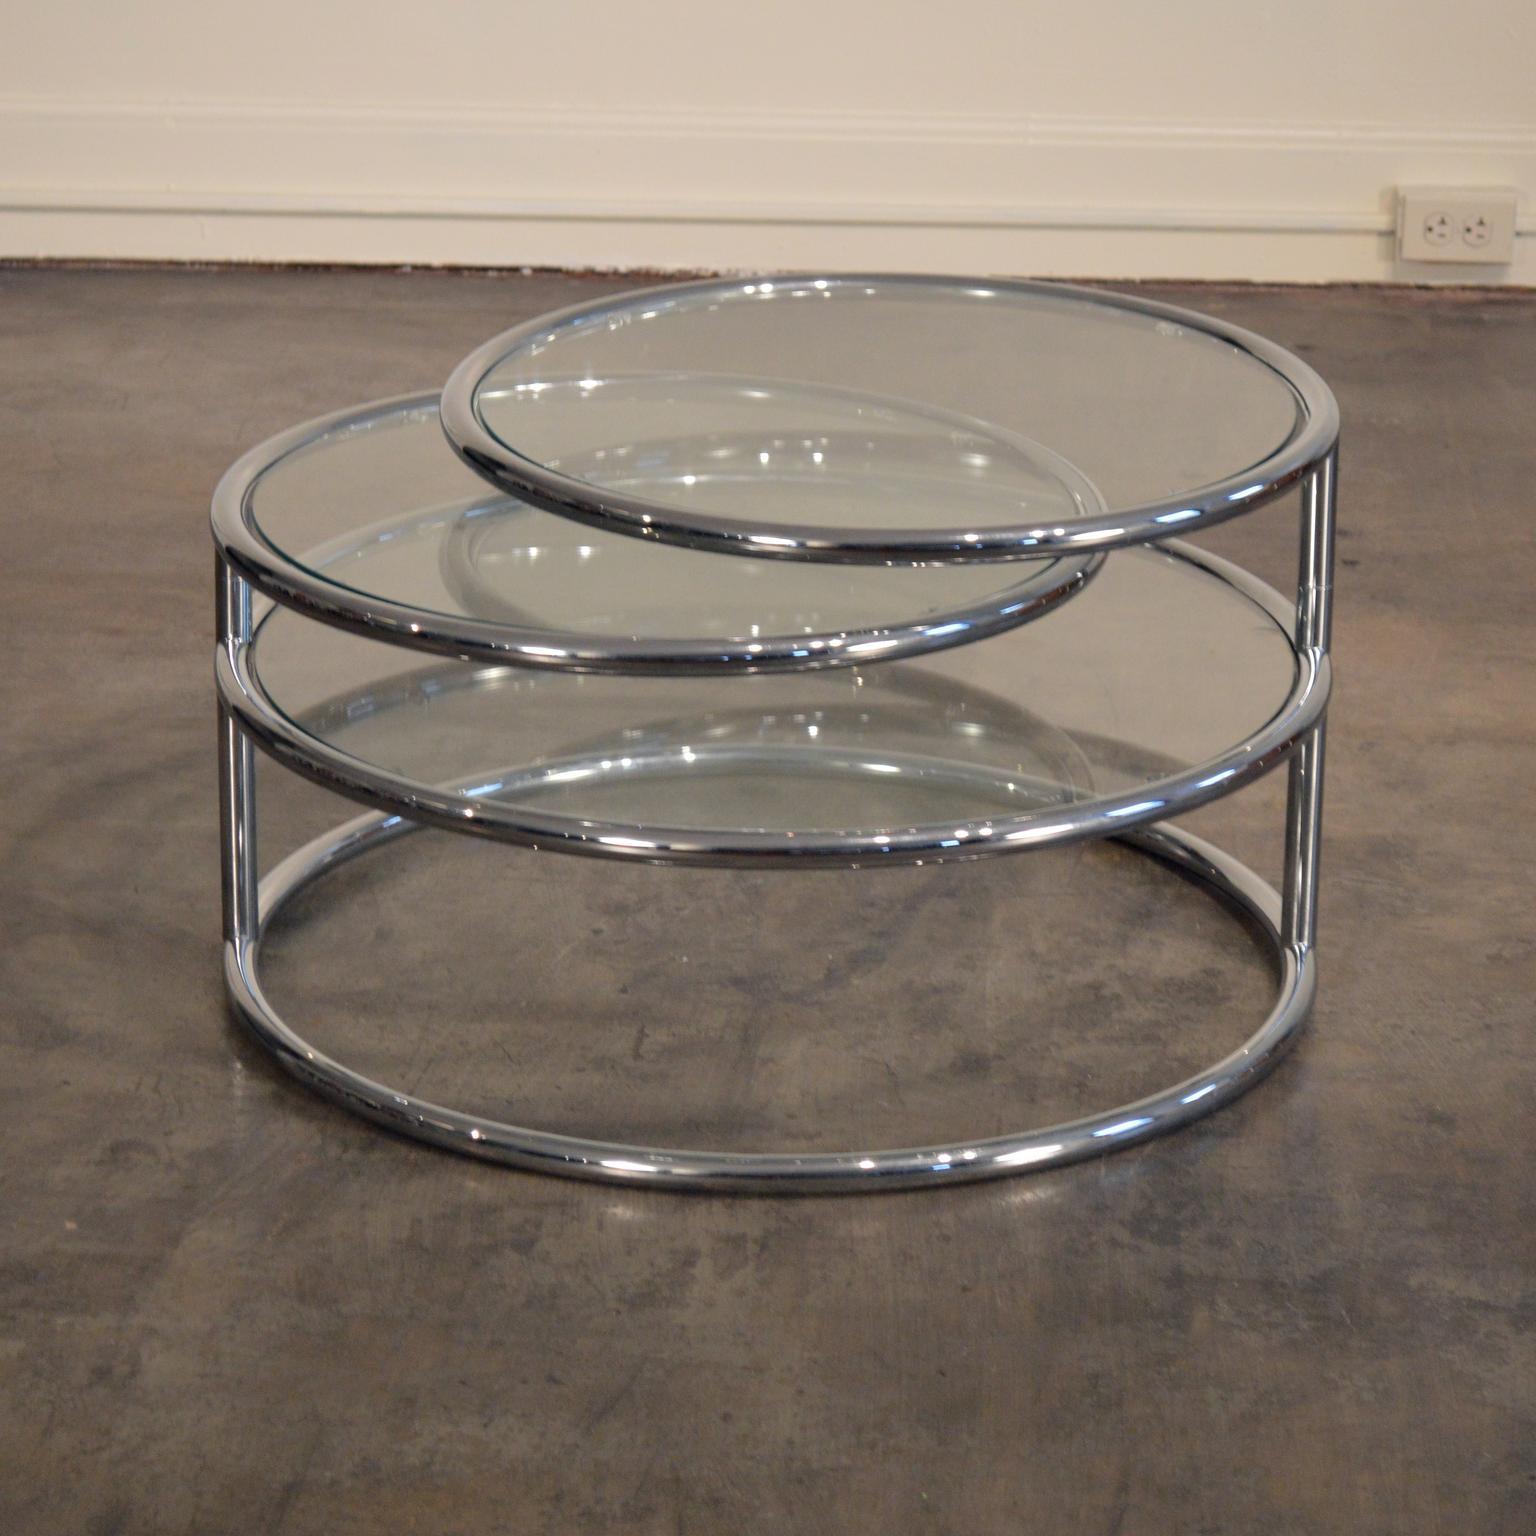 Articulating three tier tubular chromed steel and glass cocktail table. Luxurious and expertly crafted, this modern classic is versatile and sturdy enough for entertaining and display. The two top shelves seamlessly swivel 360 degrees. The bottom